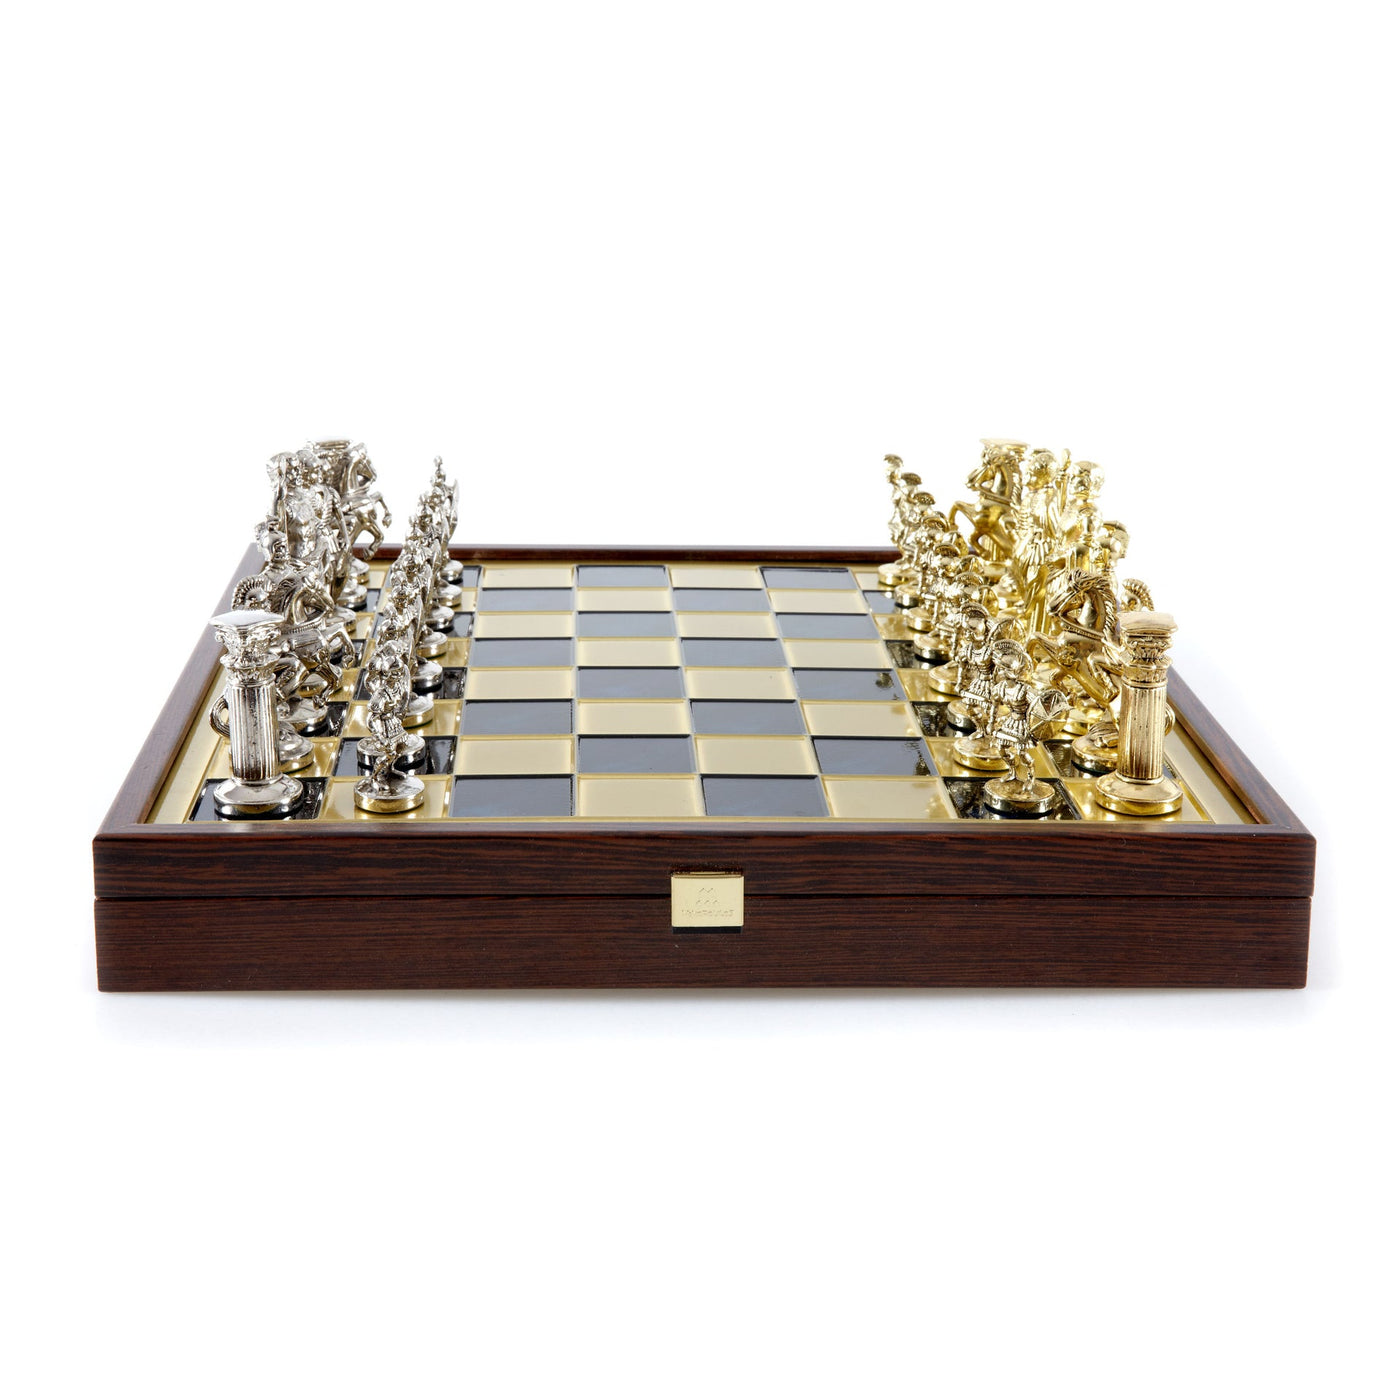 Greek Roman Period Metal Chess set with Gold and Silver Chessmen/Blue Chessboard 41cm on wooden box